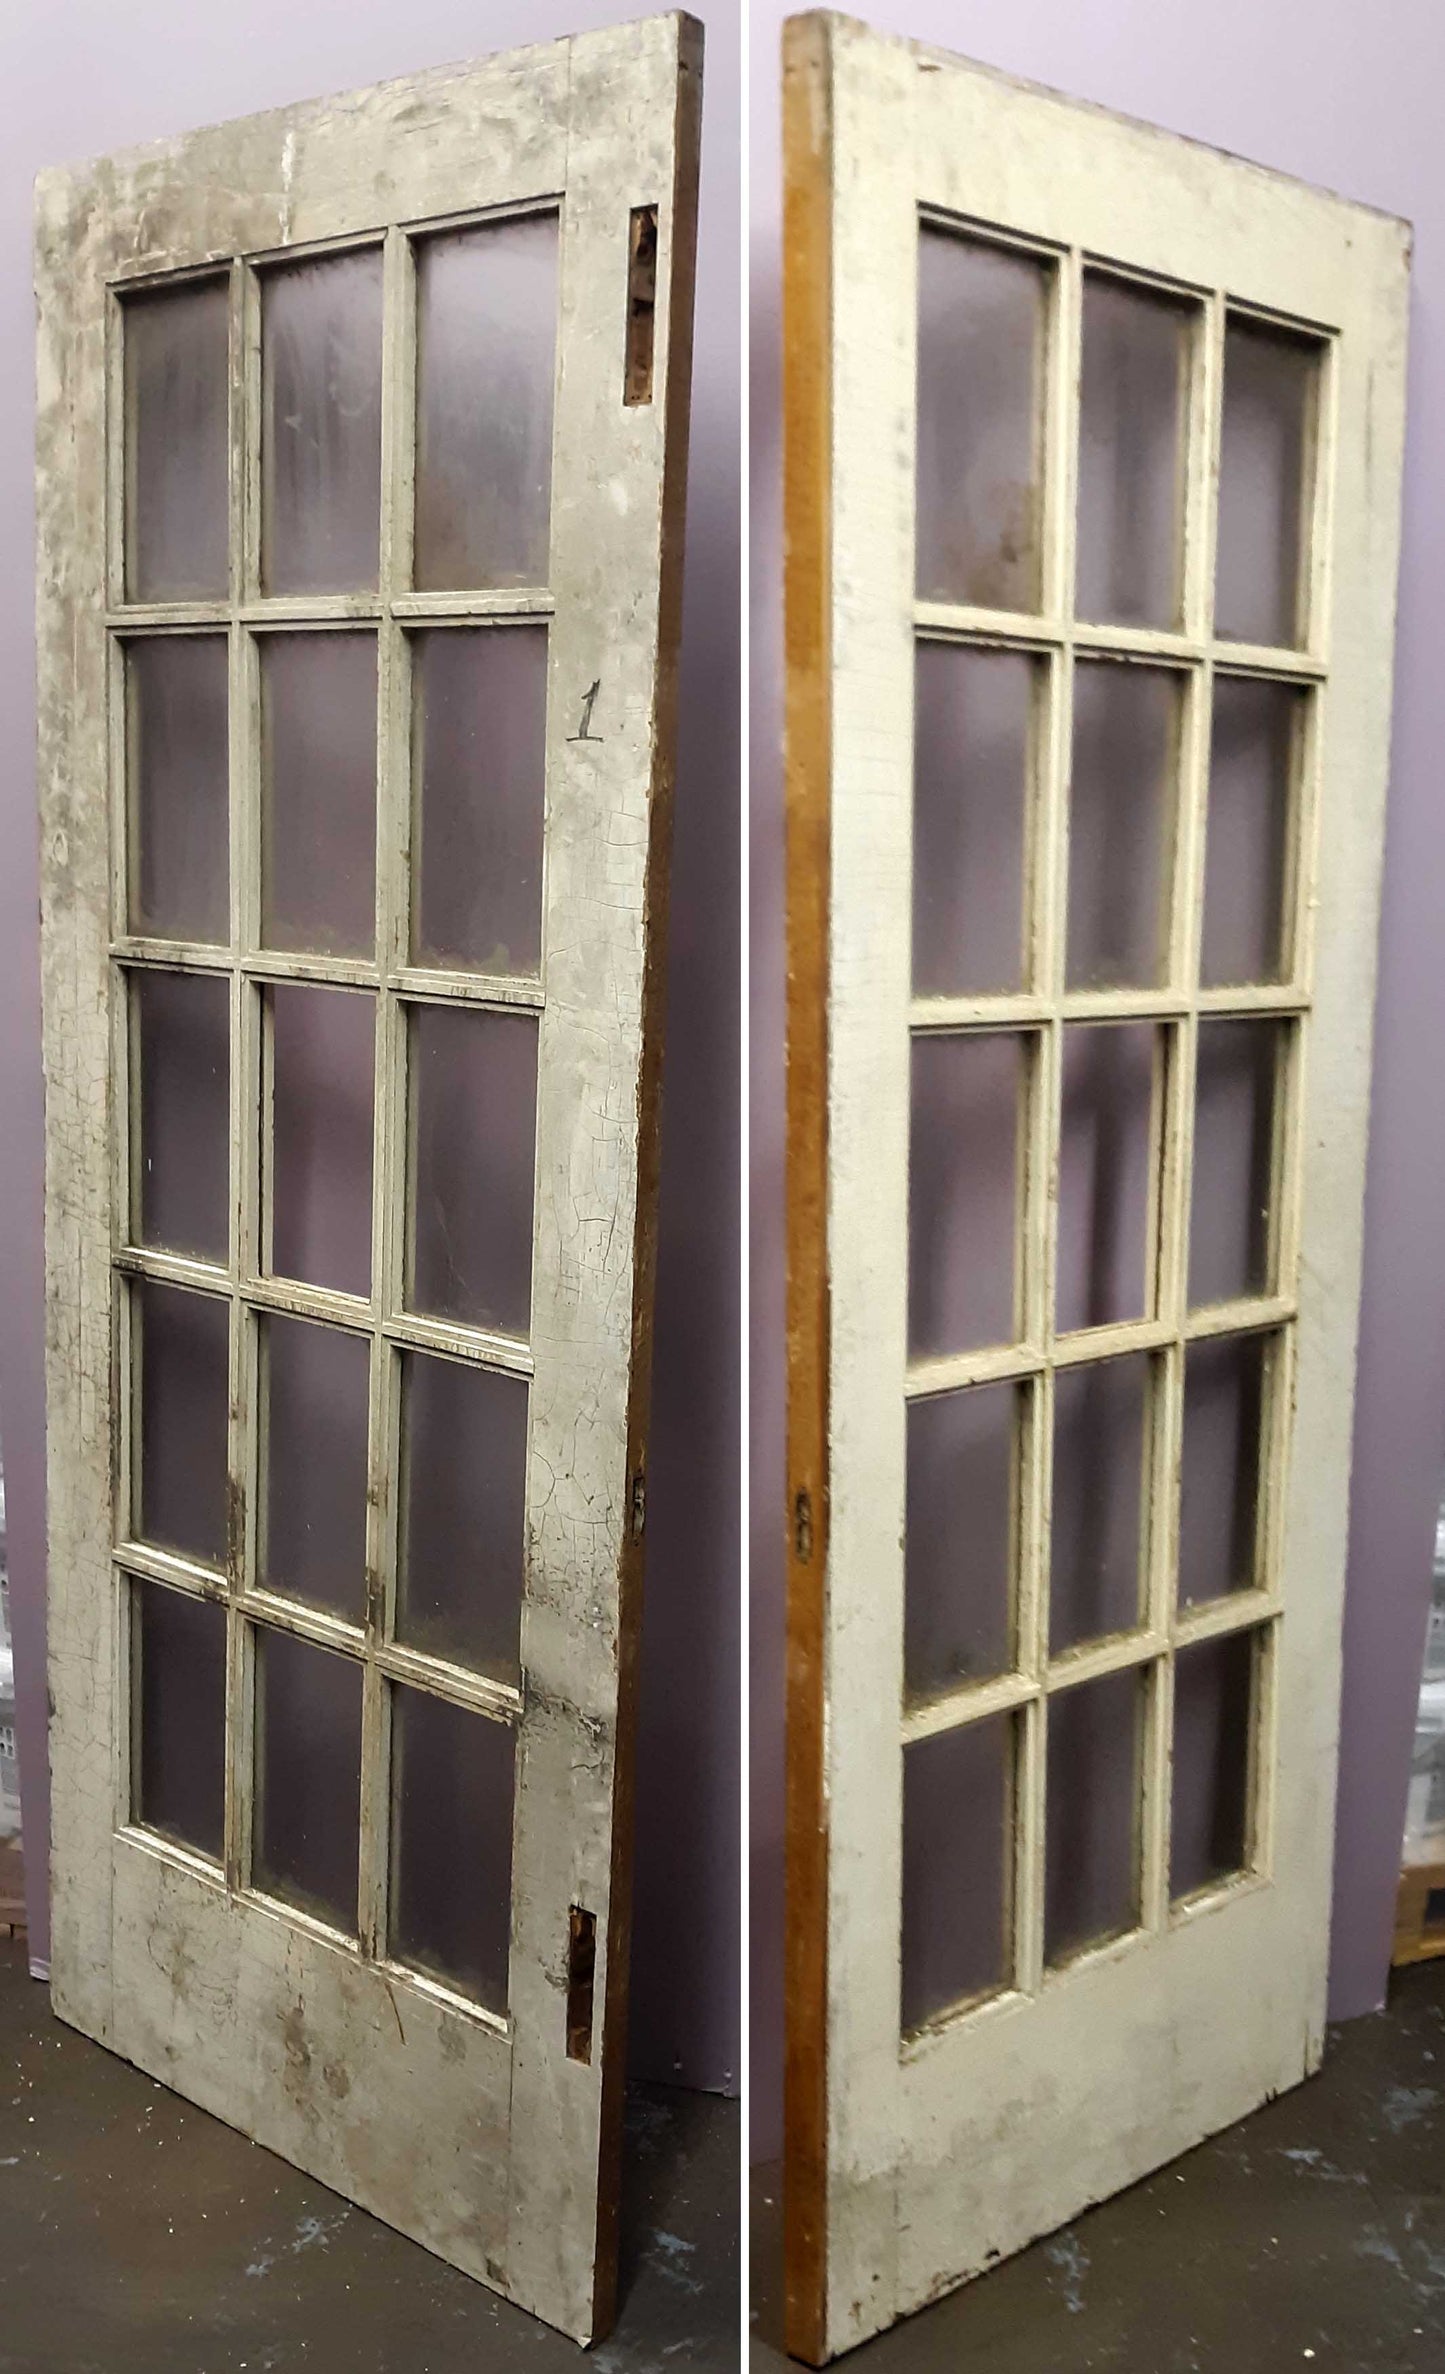 35.5"x83"x1.75" Antique Vintage Old Reclaimed Salvaged Wood Wooden Interior French Door Window Glass